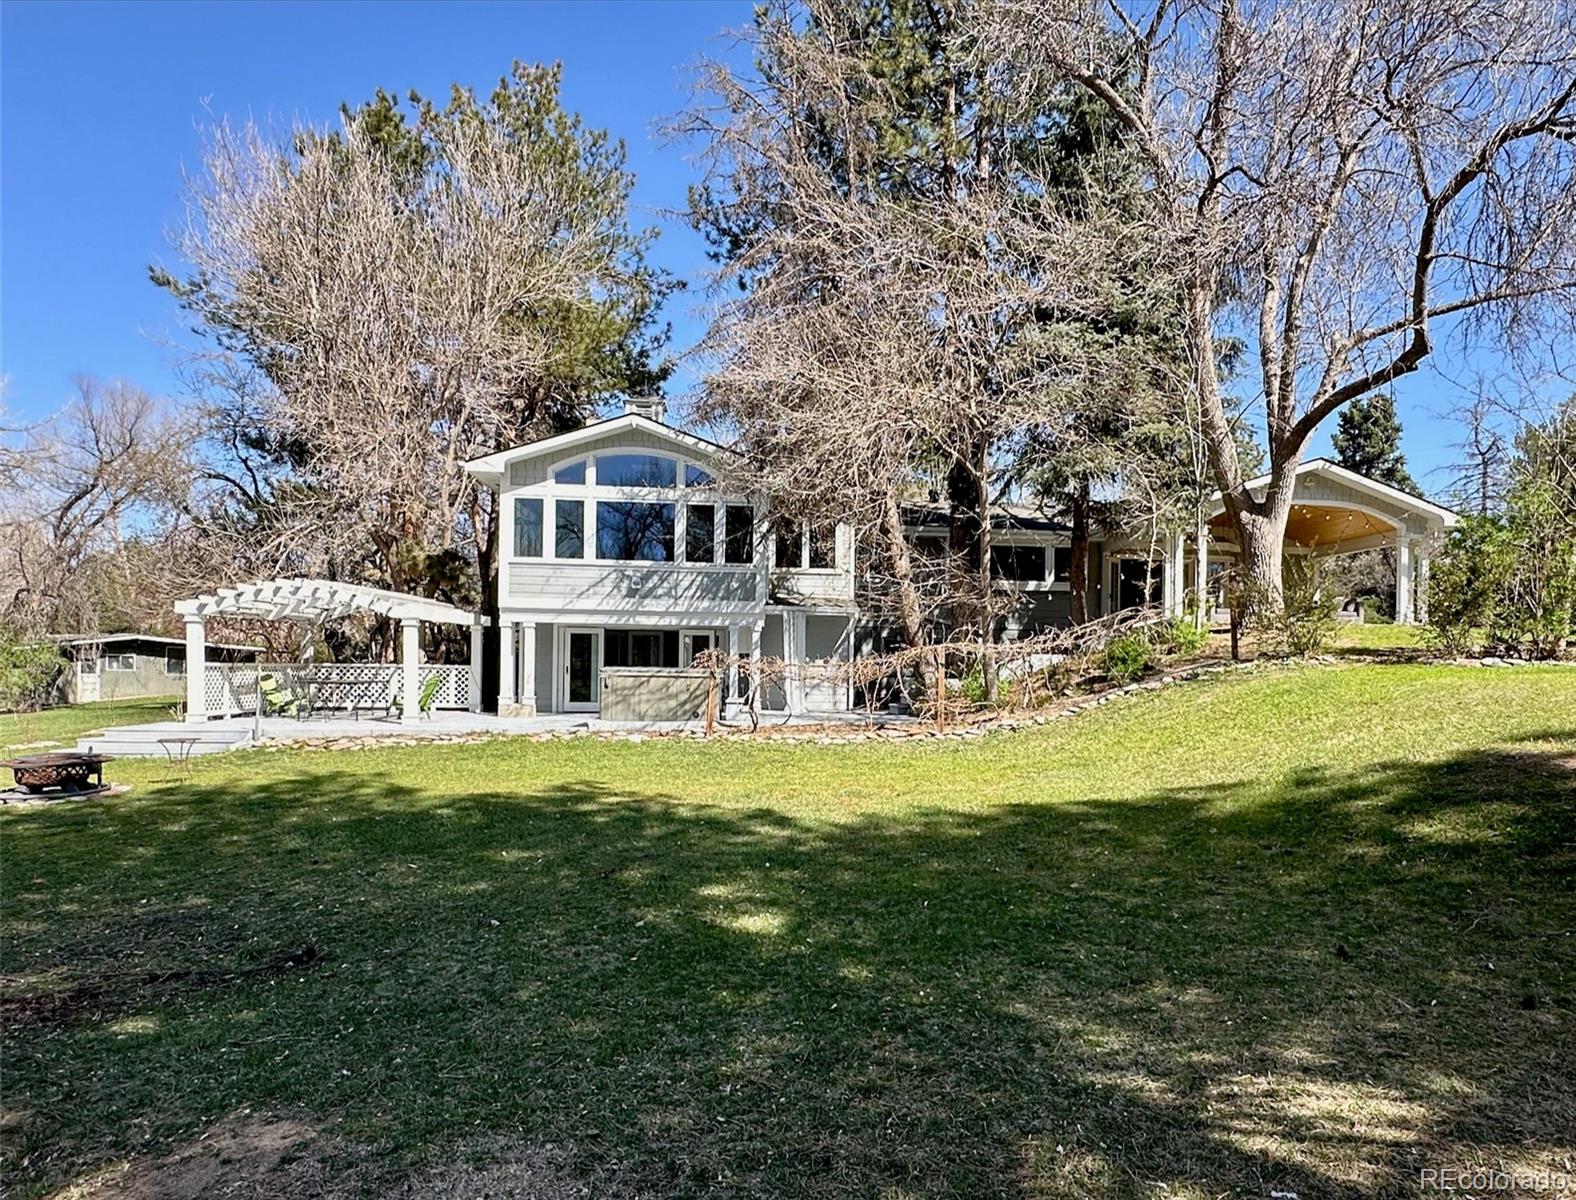 7190 s prince street, Littleton sold home. Closed on 2024-05-13 for $1,800,000.